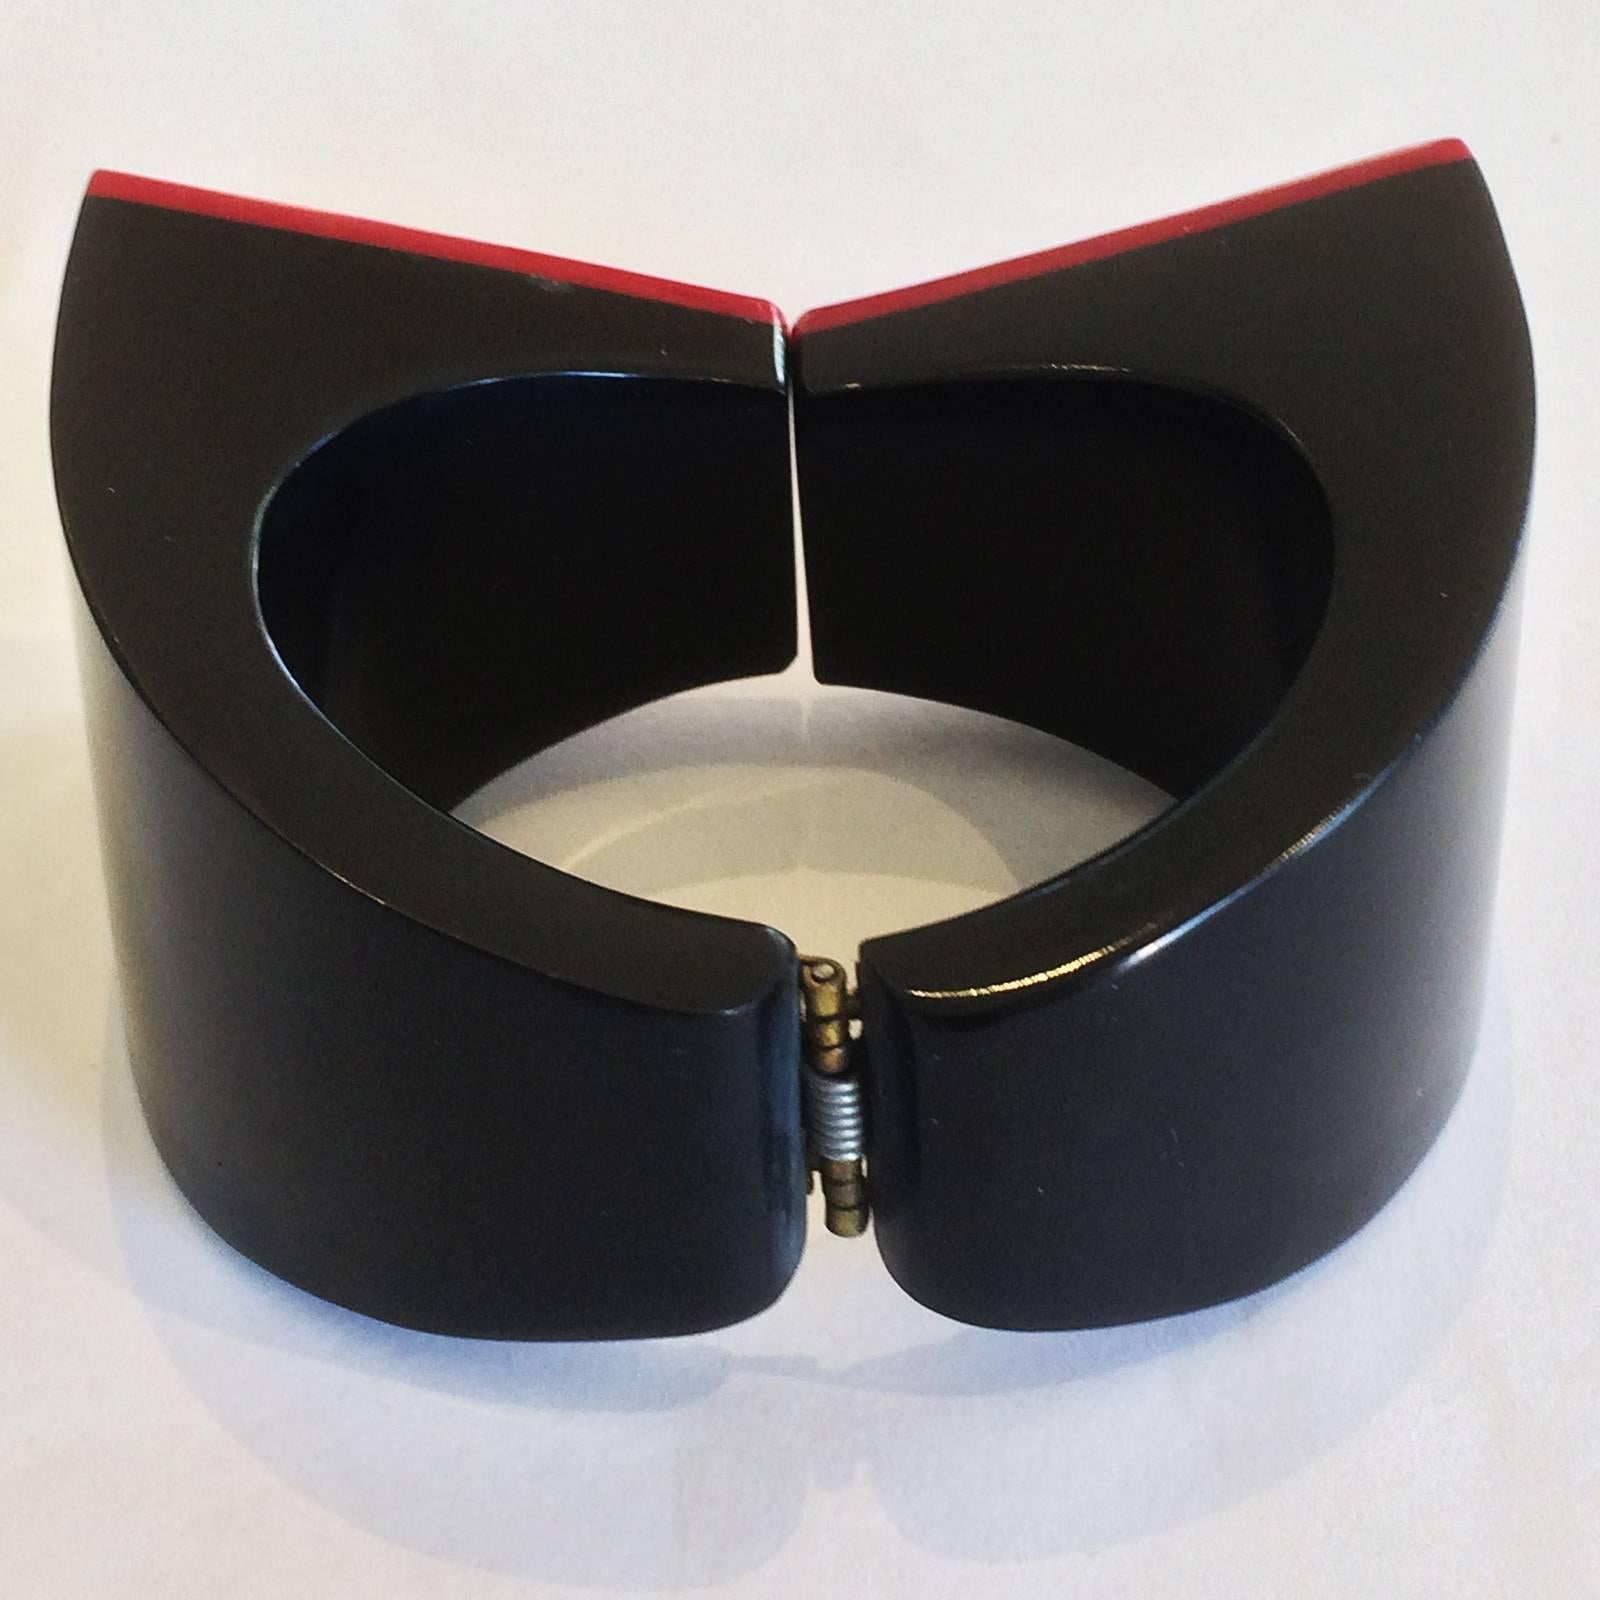 Art Deco Clamper French Bakelite Bangle in Deep Red front Bowtie, laminated onto thick Black Bakelite body (extremely rare procedure). All in perfect condition, including original spring hinge to rear, all working properly, with no damage, no